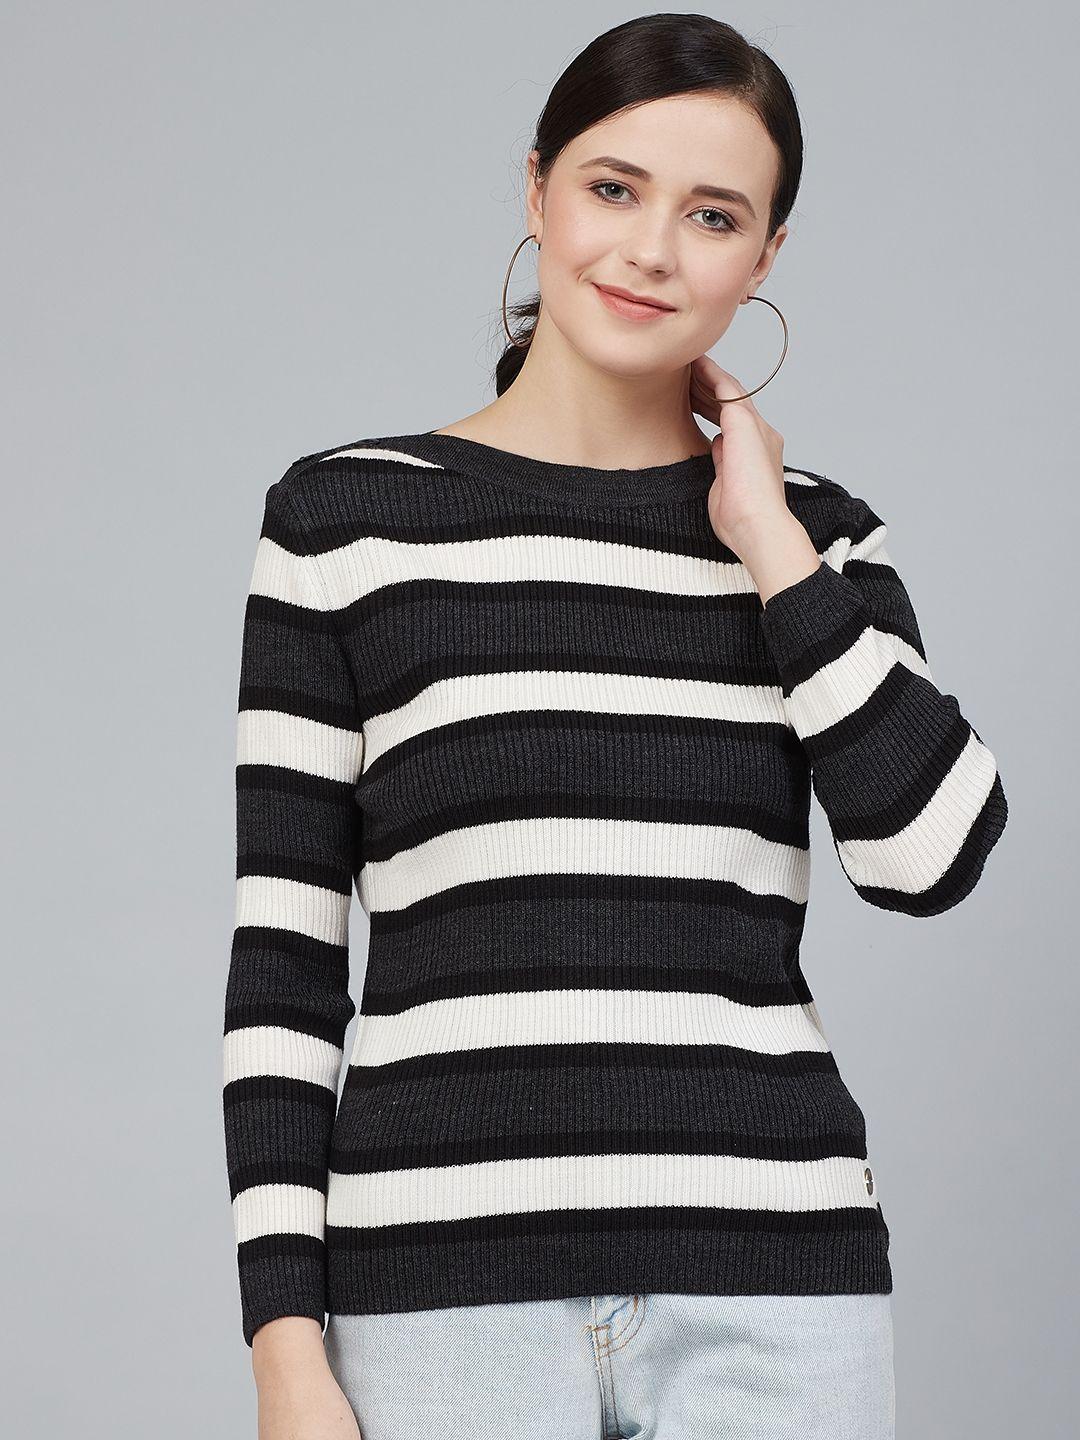 cayman women charcoal grey & white striped pullover acrylic sweater